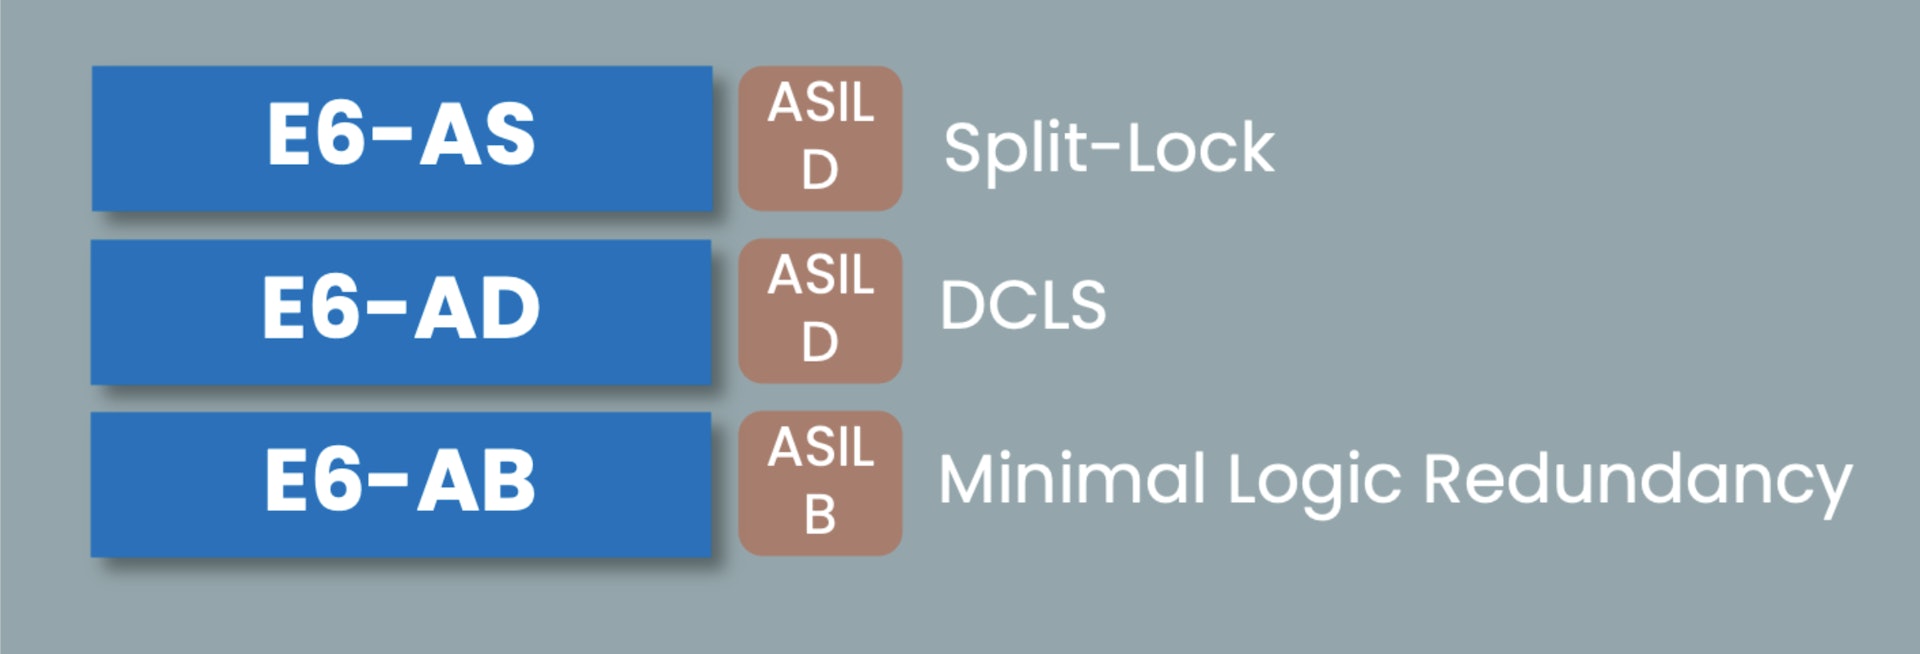 The E6-A Series is available in three variants; E6-AB targeting ASIL B integrity level, E6-AD targeting ASIL D integrity level, and E6-AS supporting split-lock functionality and targeting ASIL D integrity level in lock-mode.